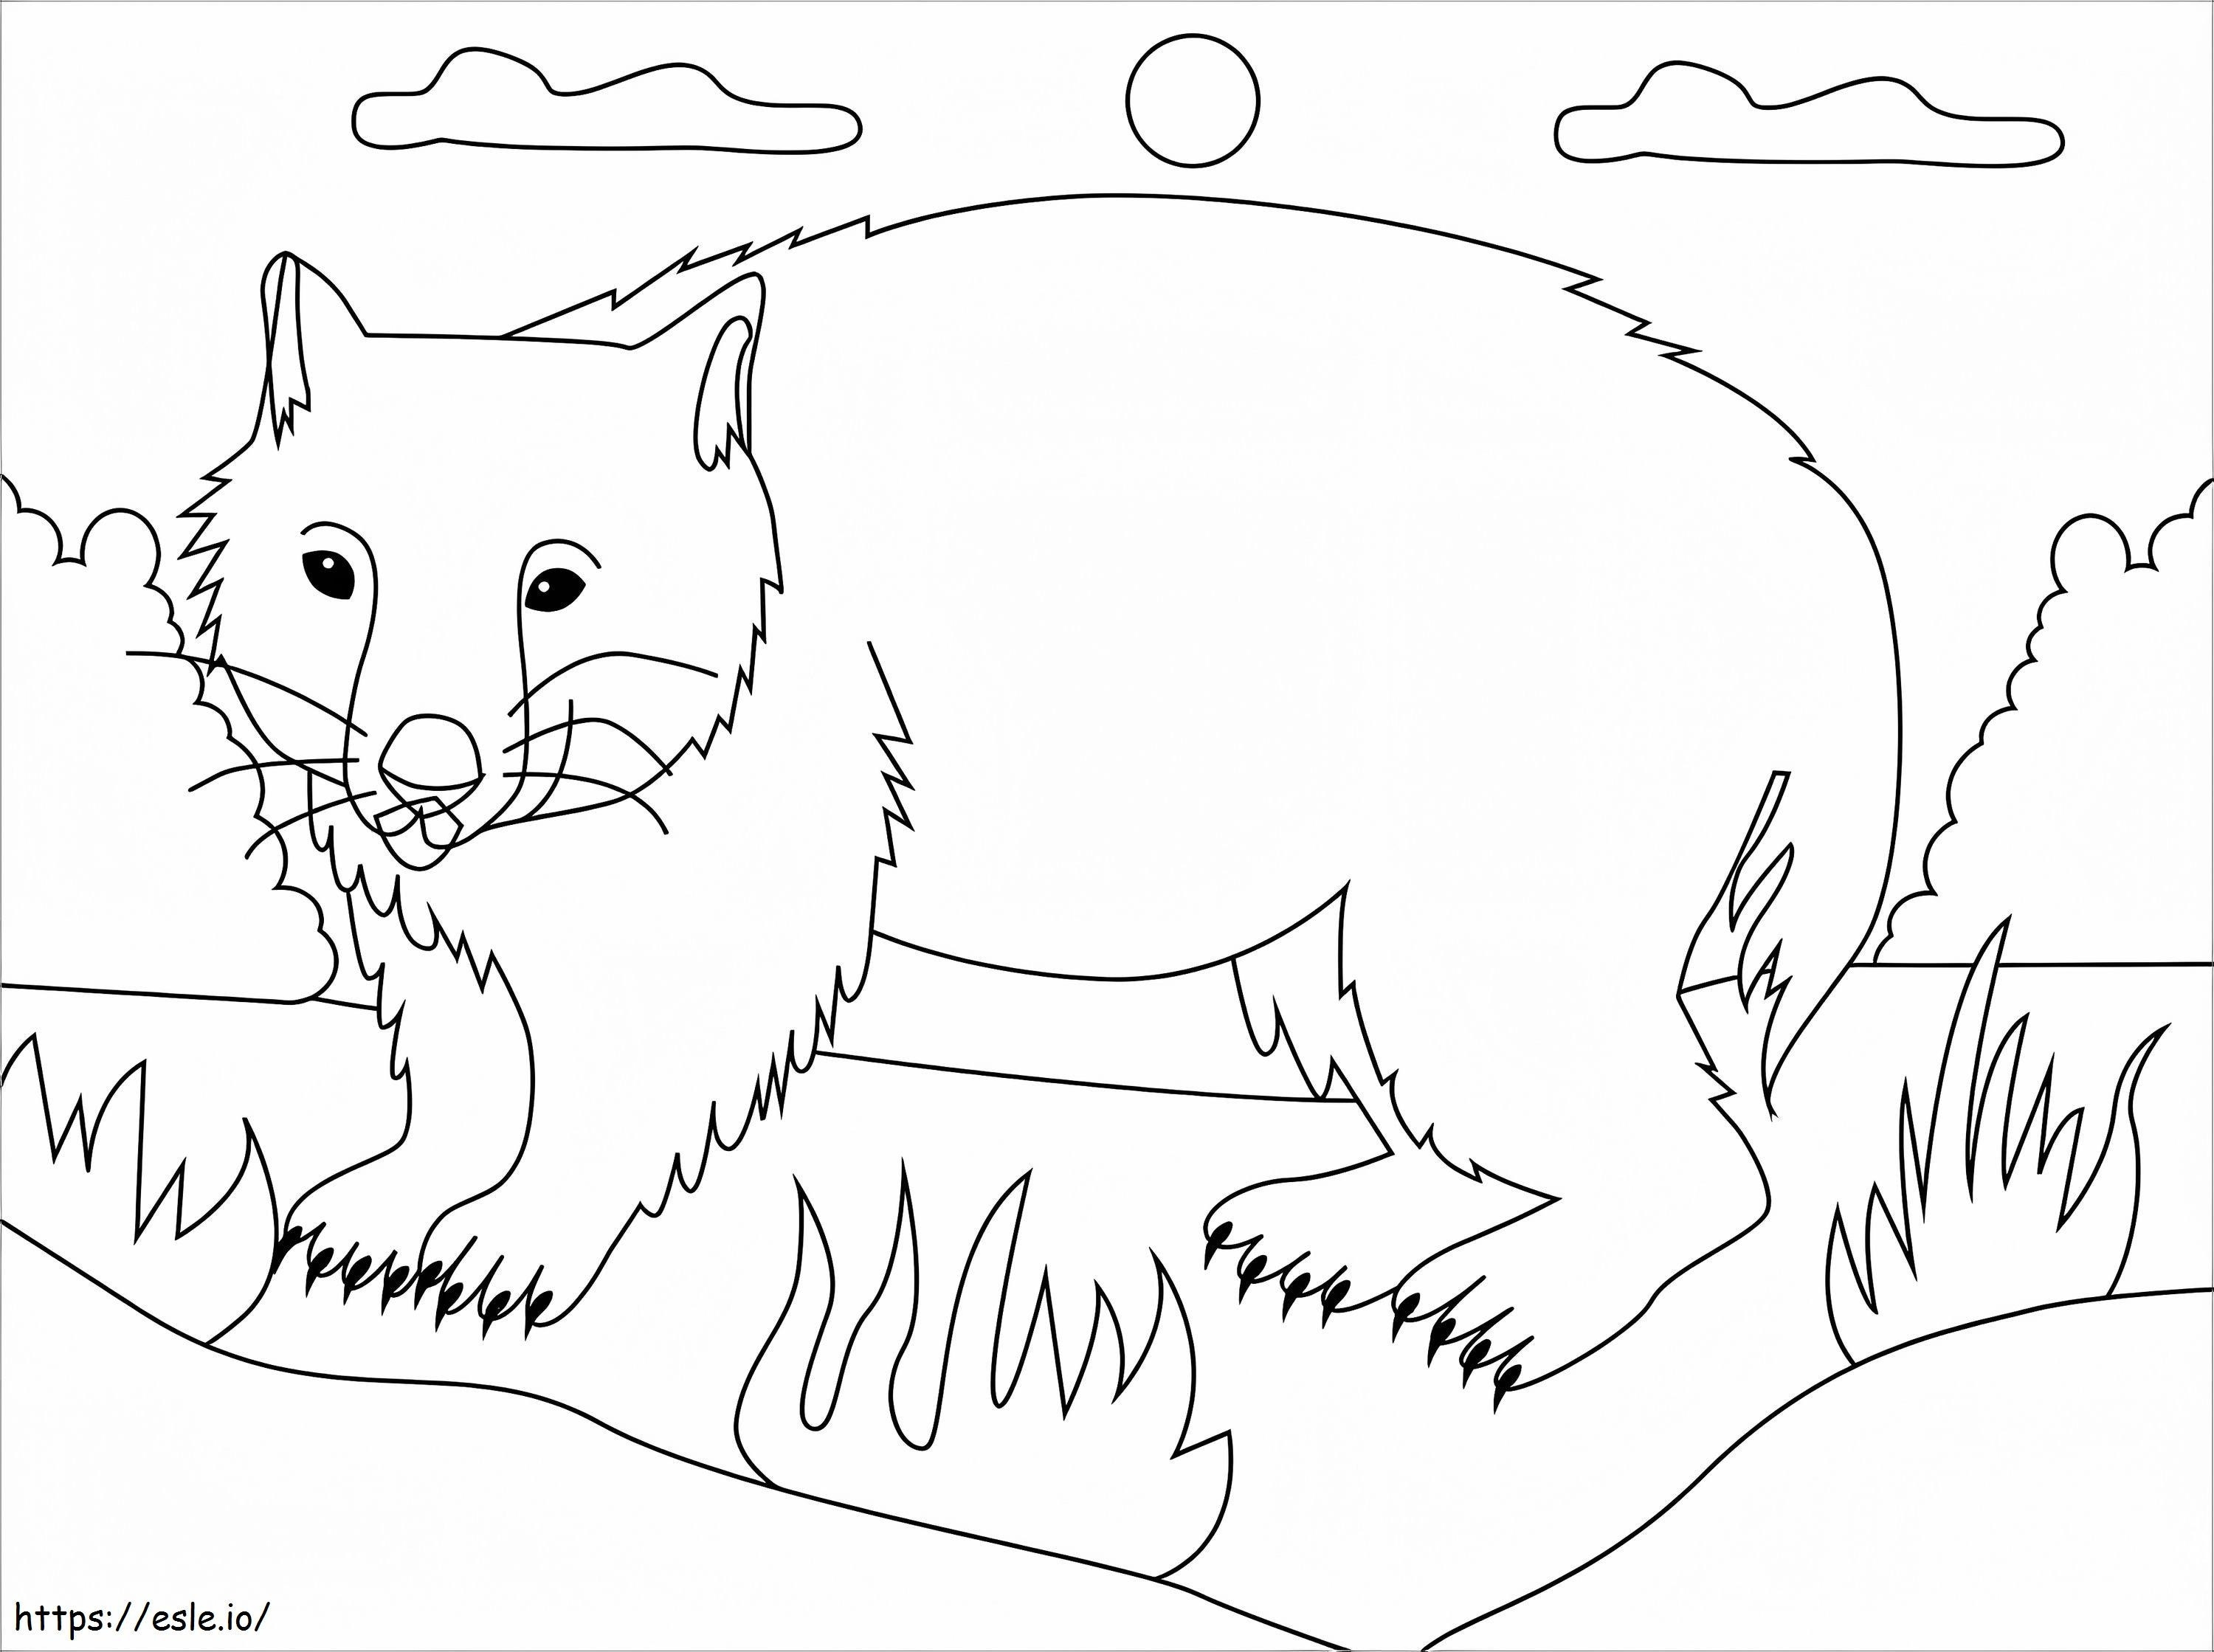 Simple Wombat coloring page